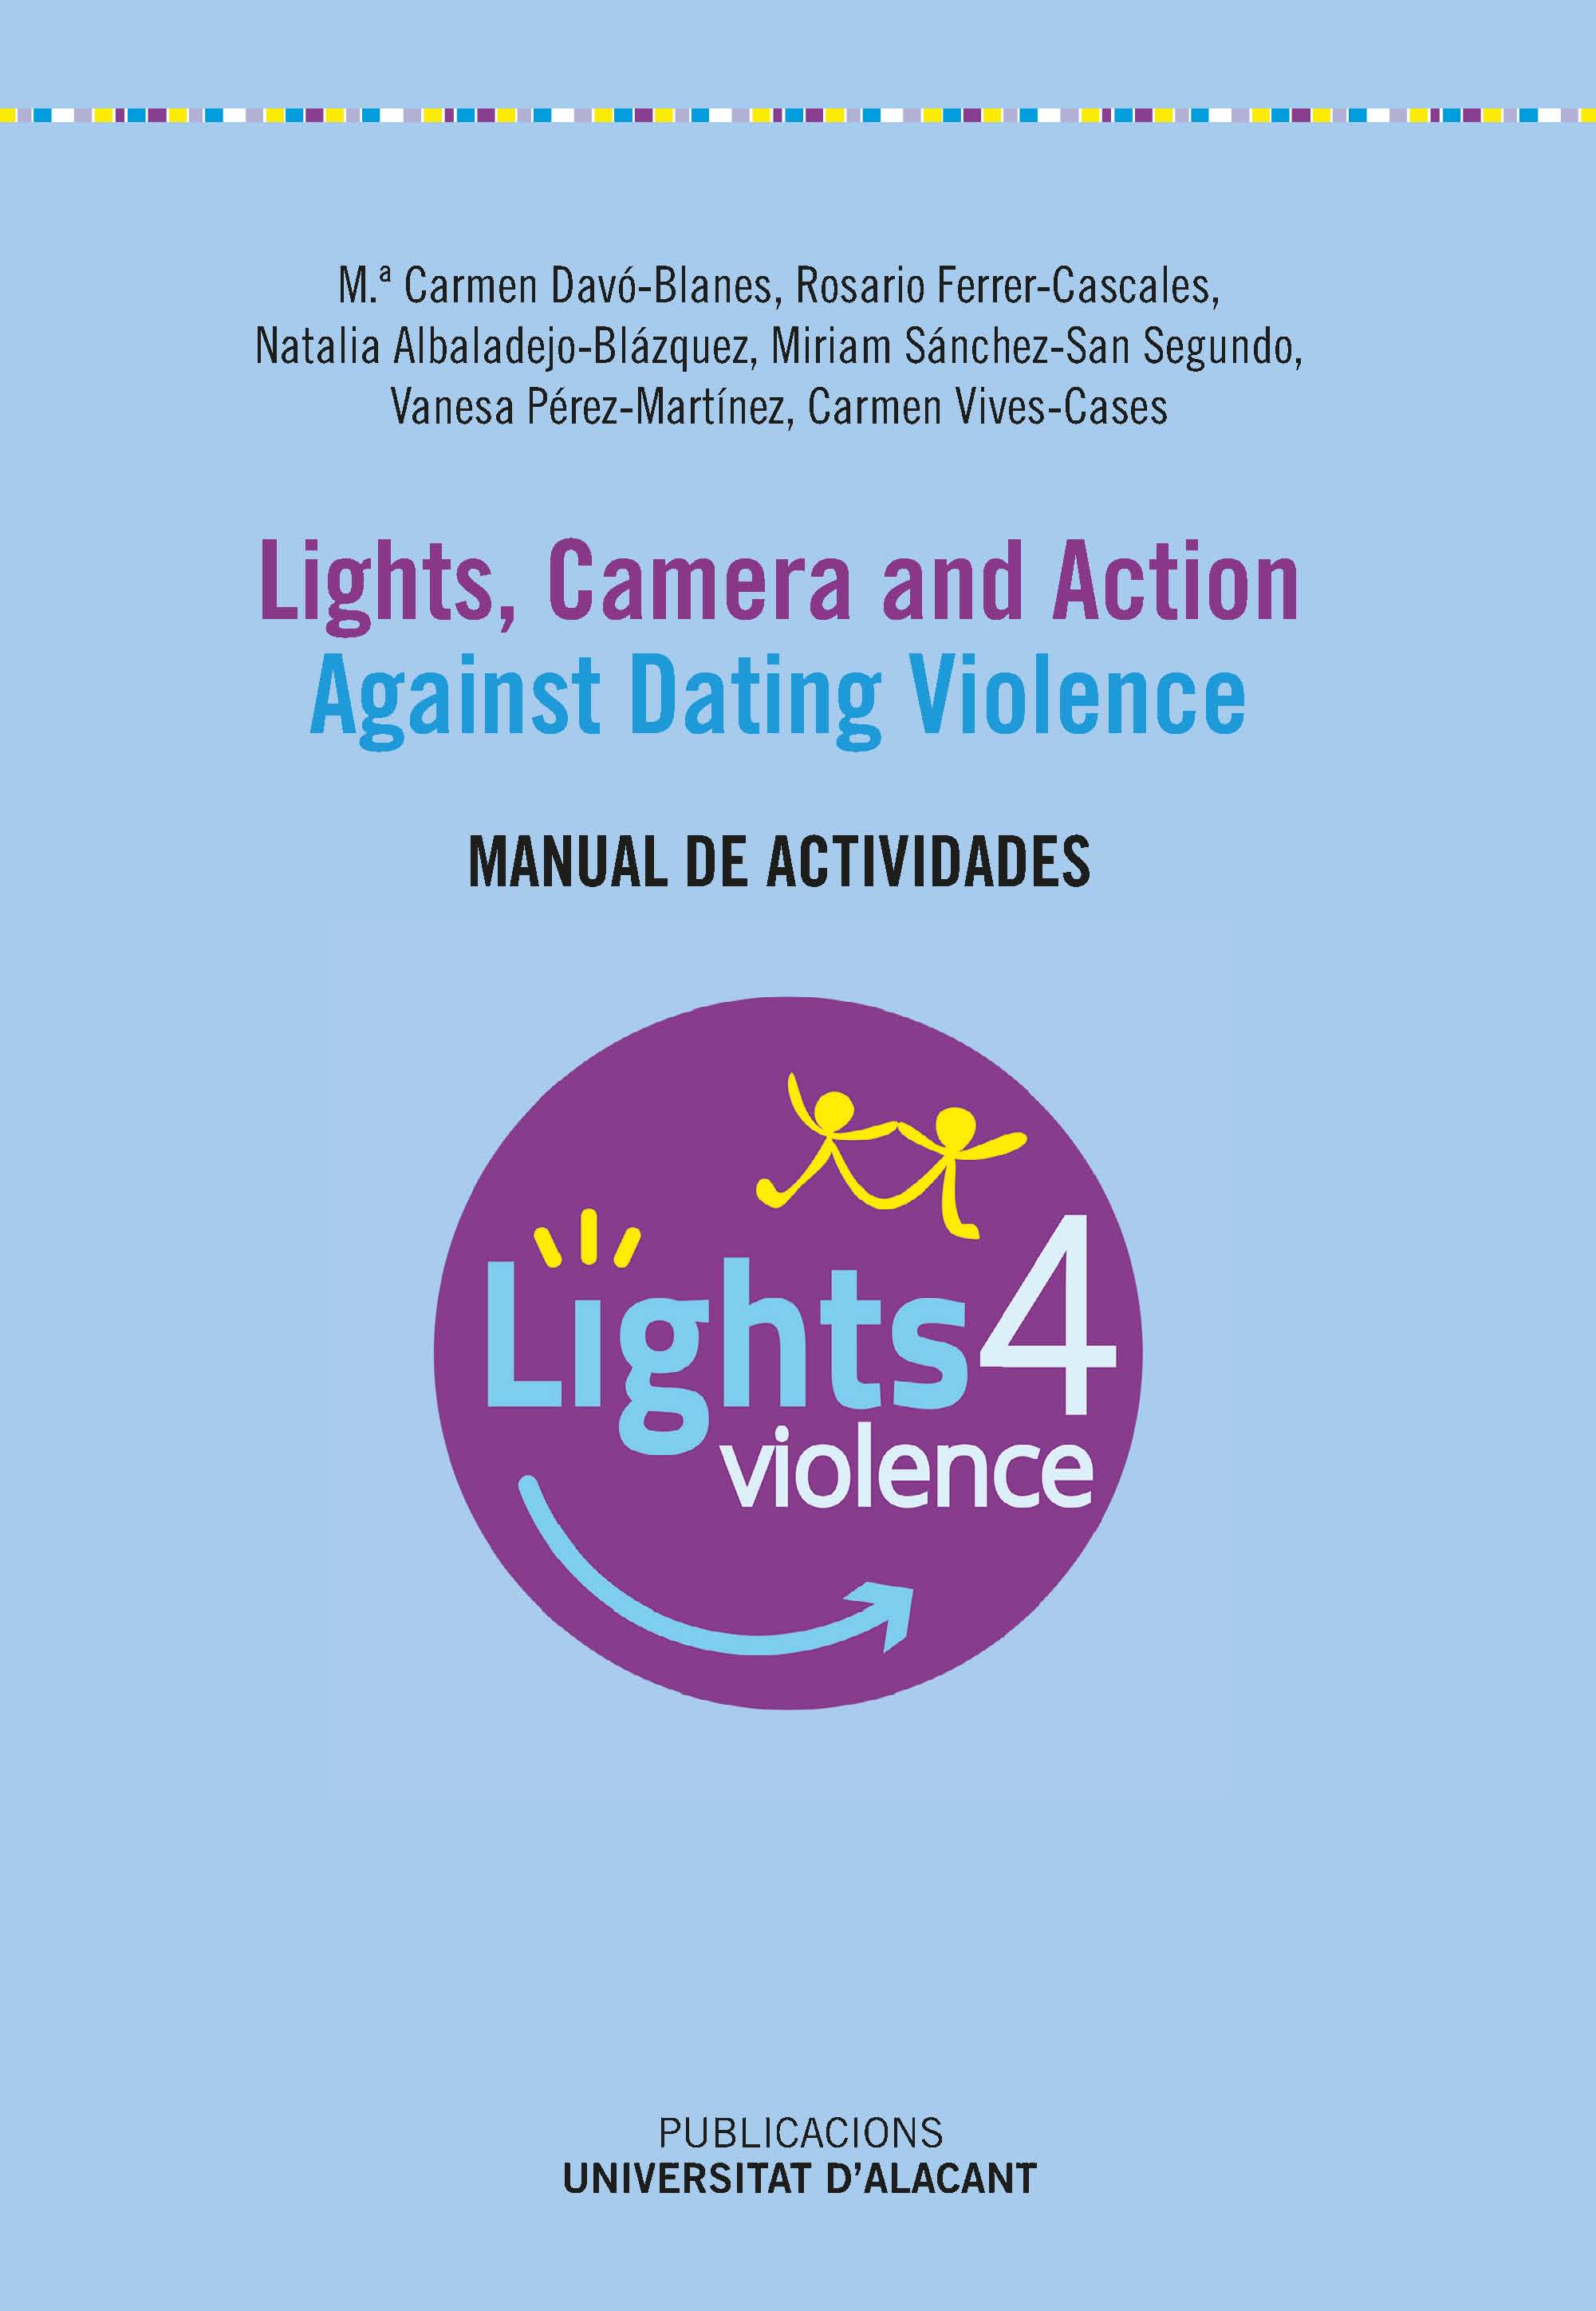 Lights, camera and action. Against Dating Violence